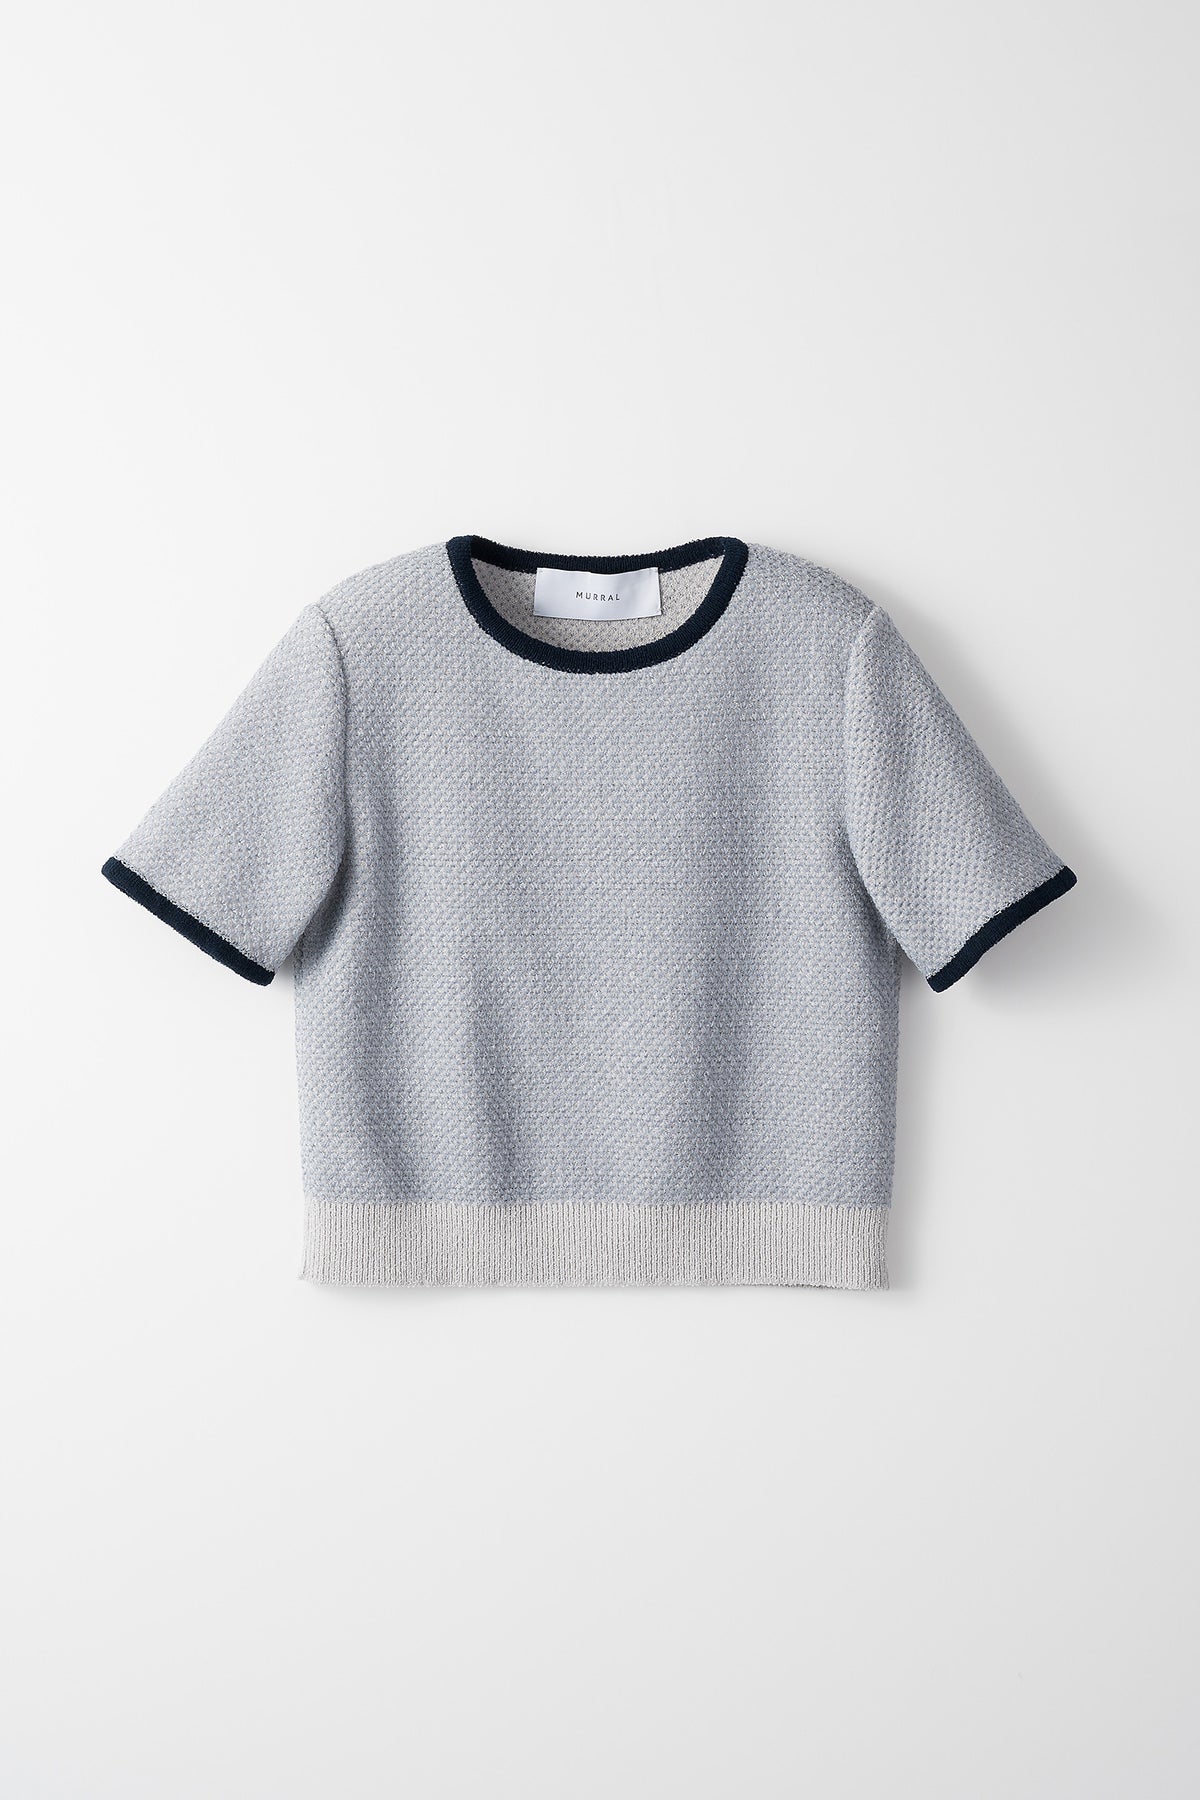 Jelly knit top (Lavender gray)